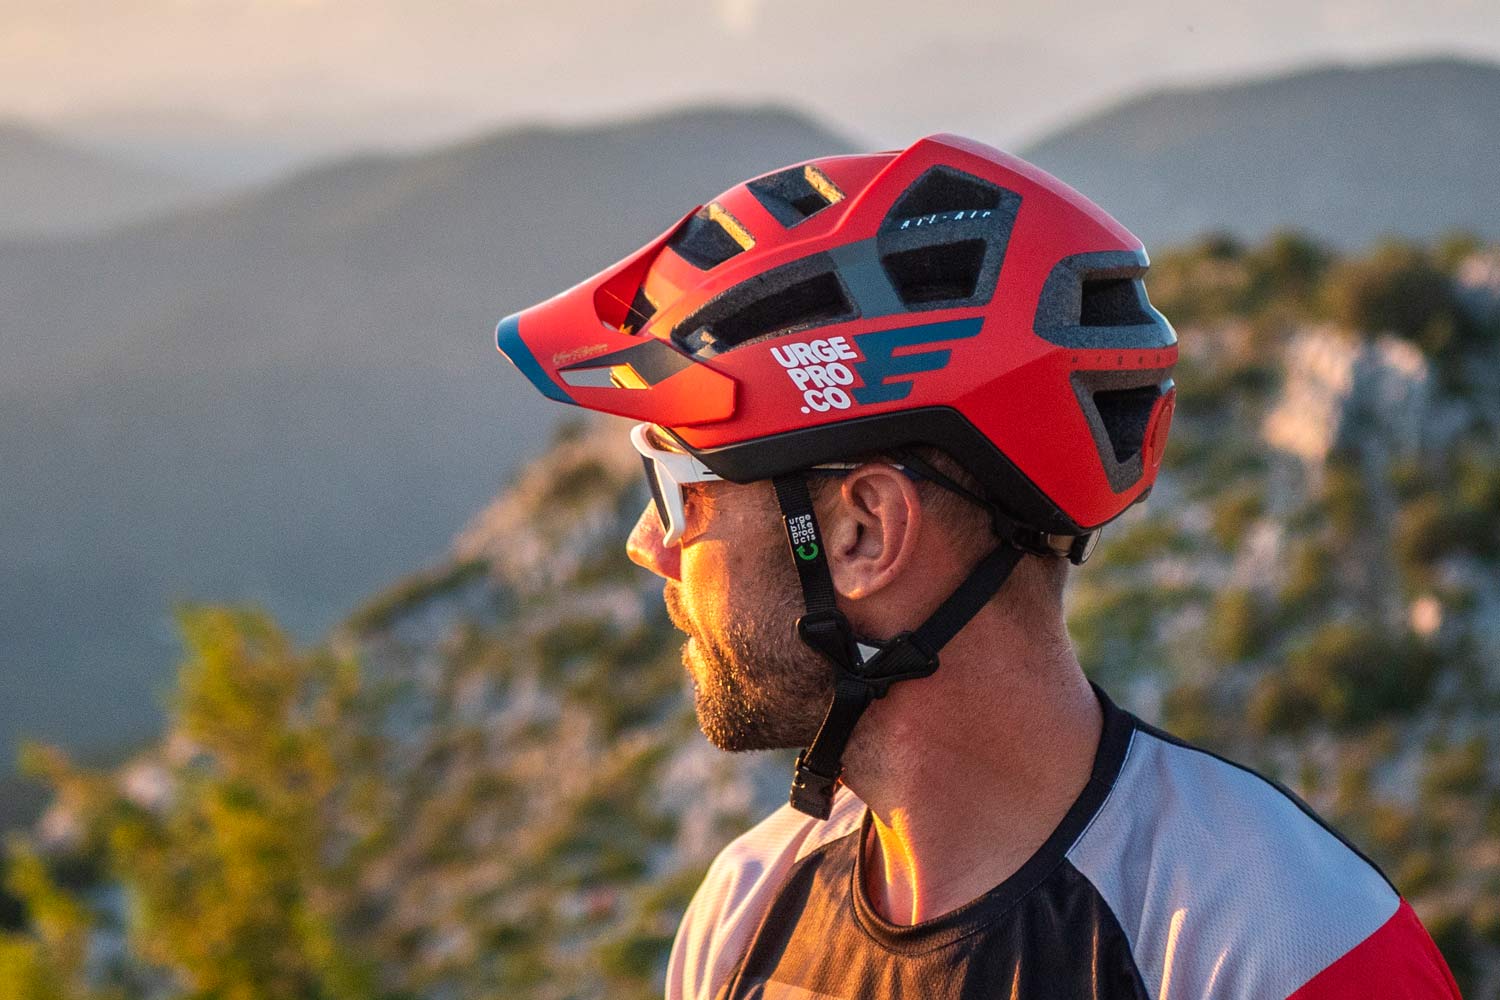 Urge All-Air all-mountain bike helmet, affordable extra ERT impact rotation reduction protection tech